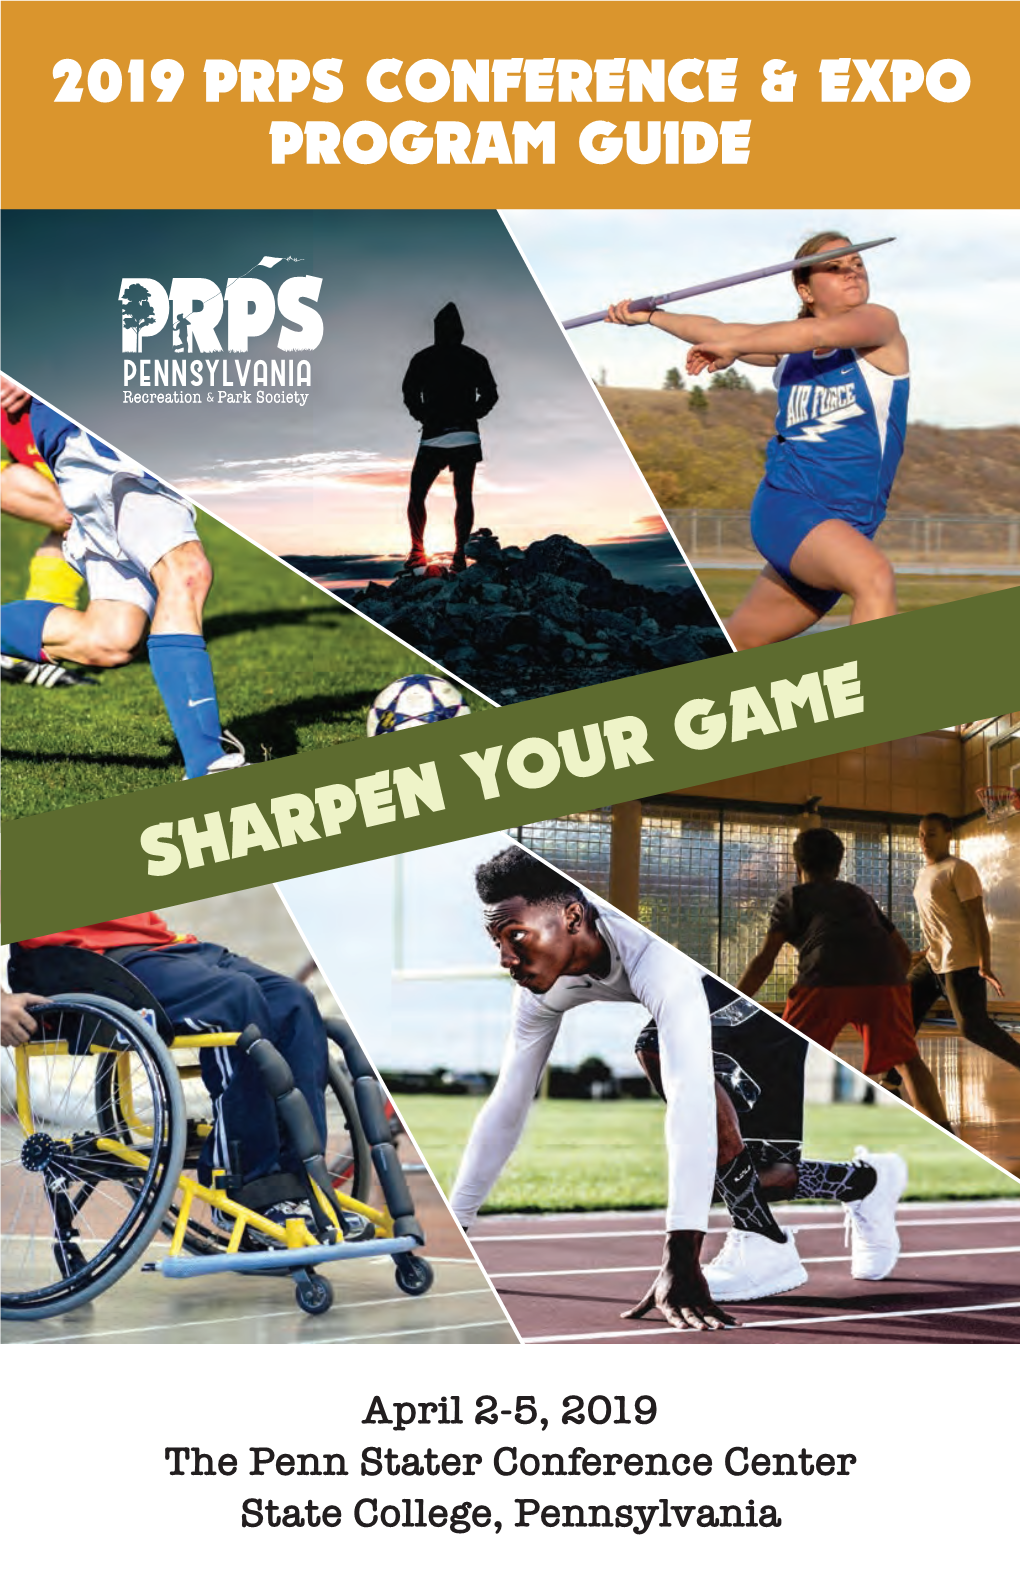 Sharpen Your Game